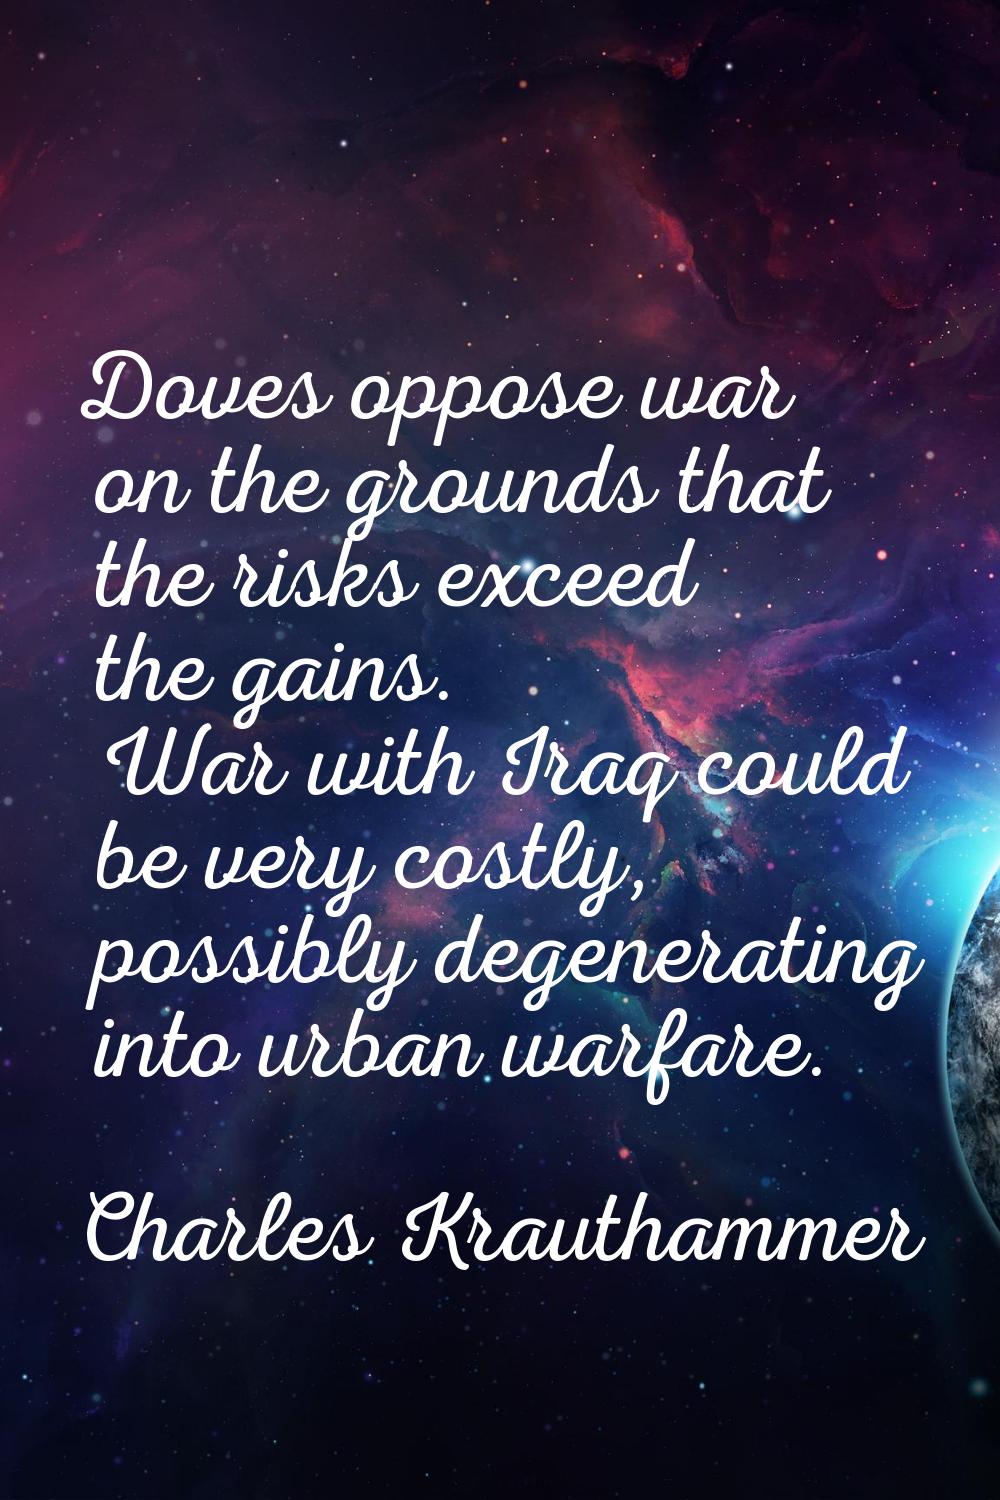 Doves oppose war on the grounds that the risks exceed the gains. War with Iraq could be very costly